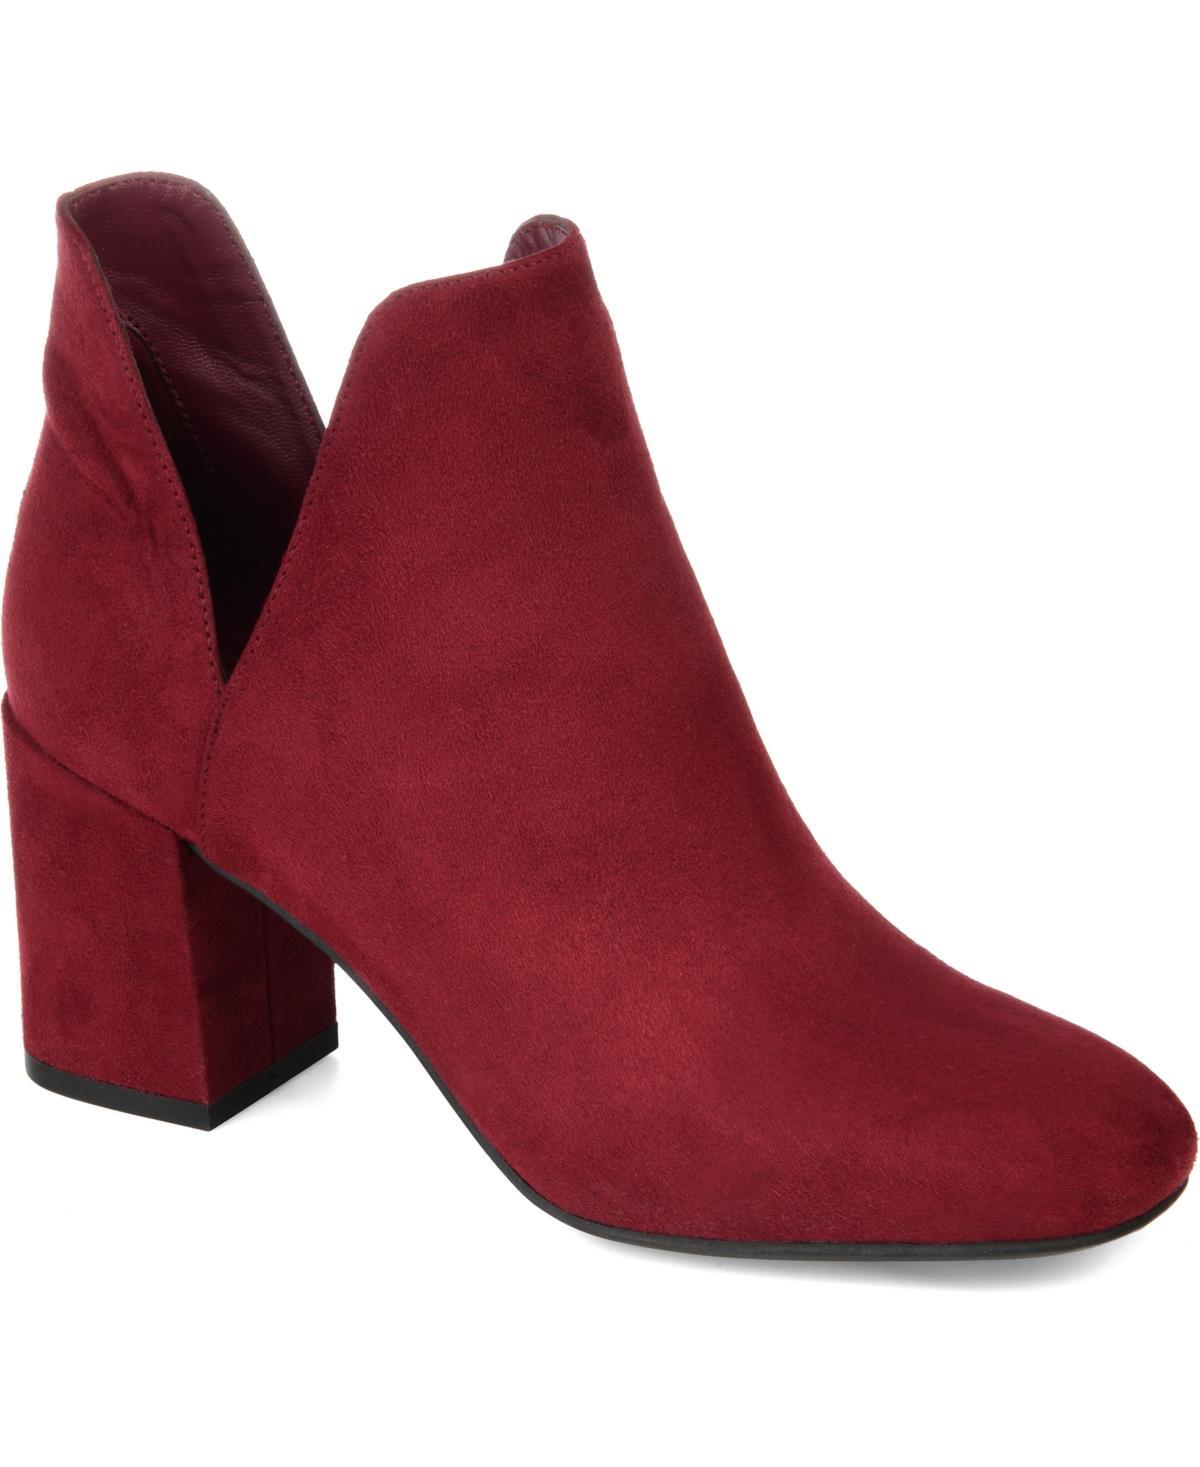 Journee Collection Gwenn Womens Ankle Boots Red Product Image